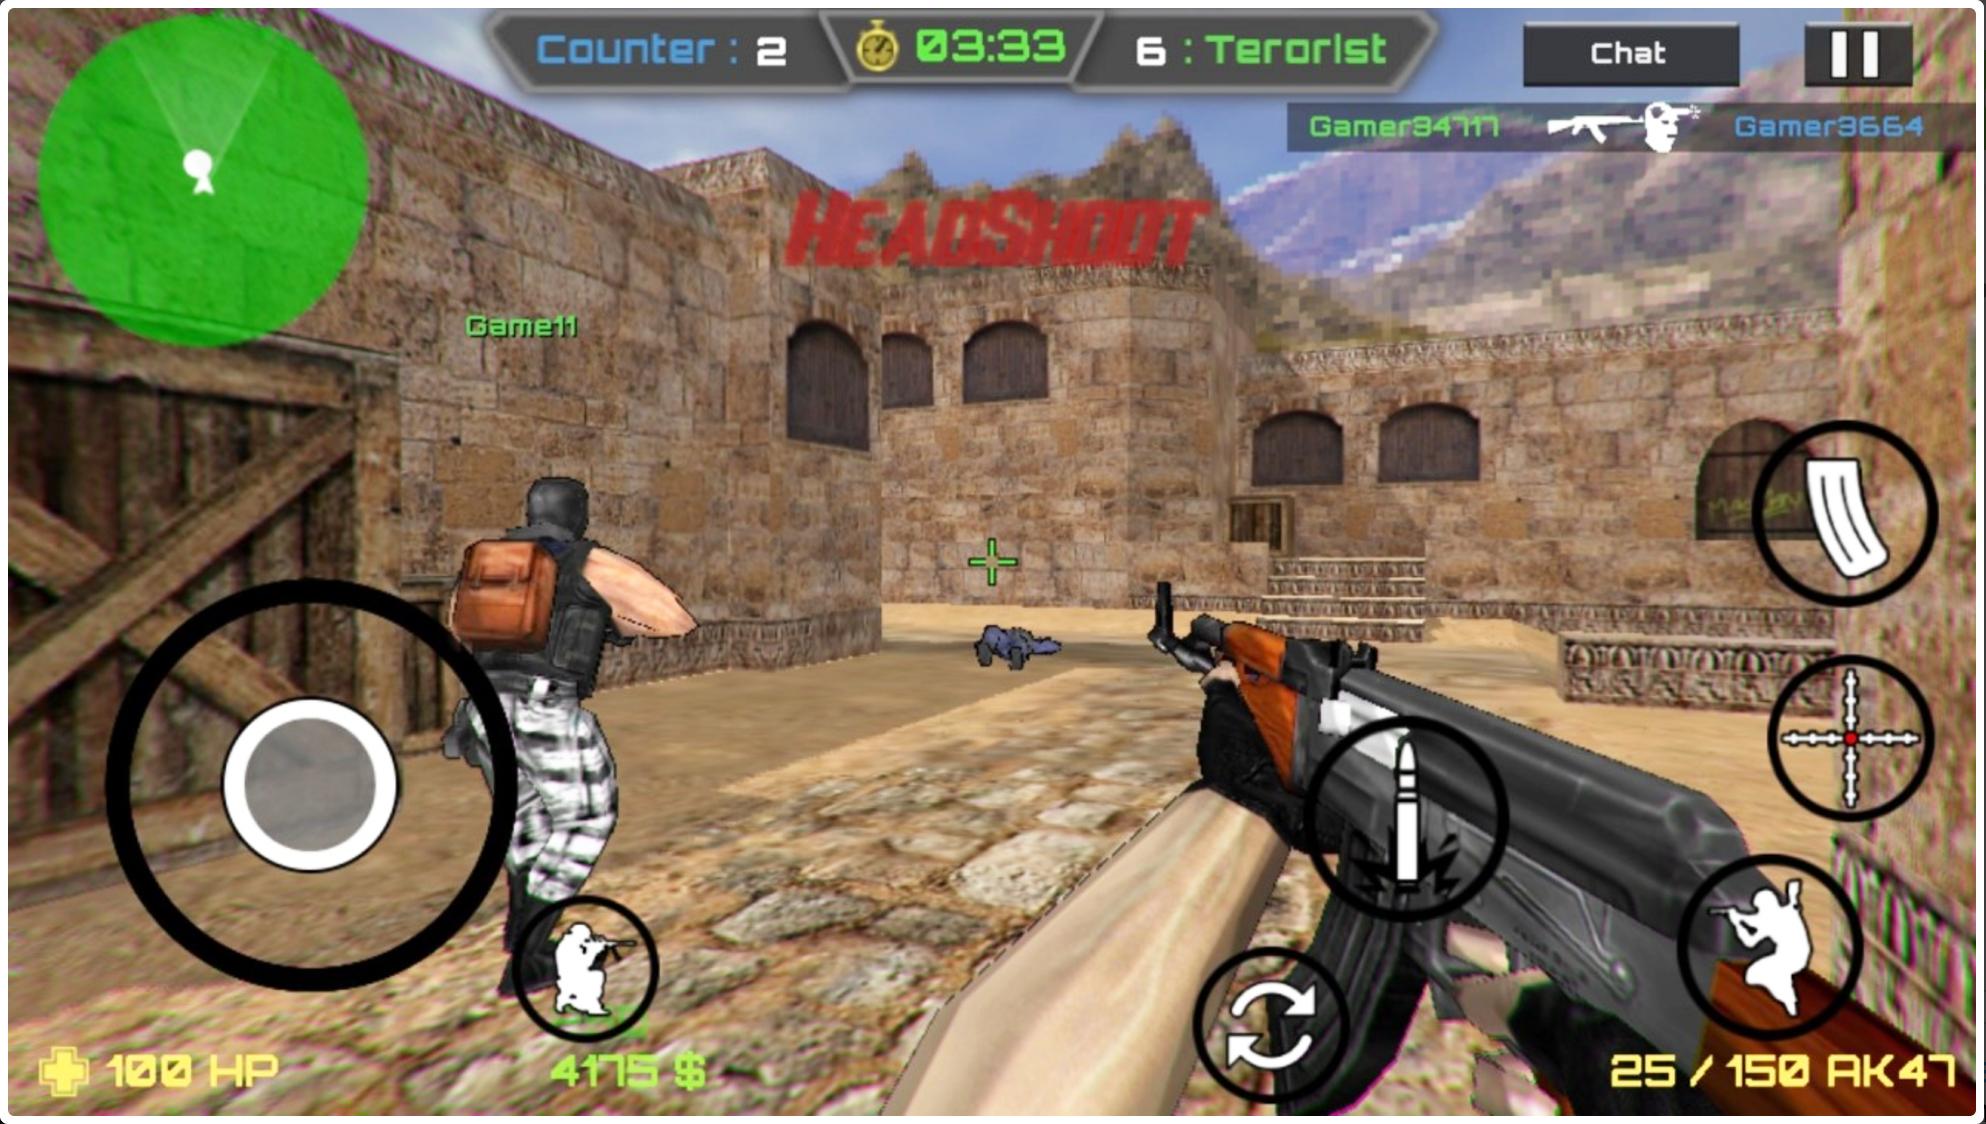 Combat Strike Online CS for Android - APK Download